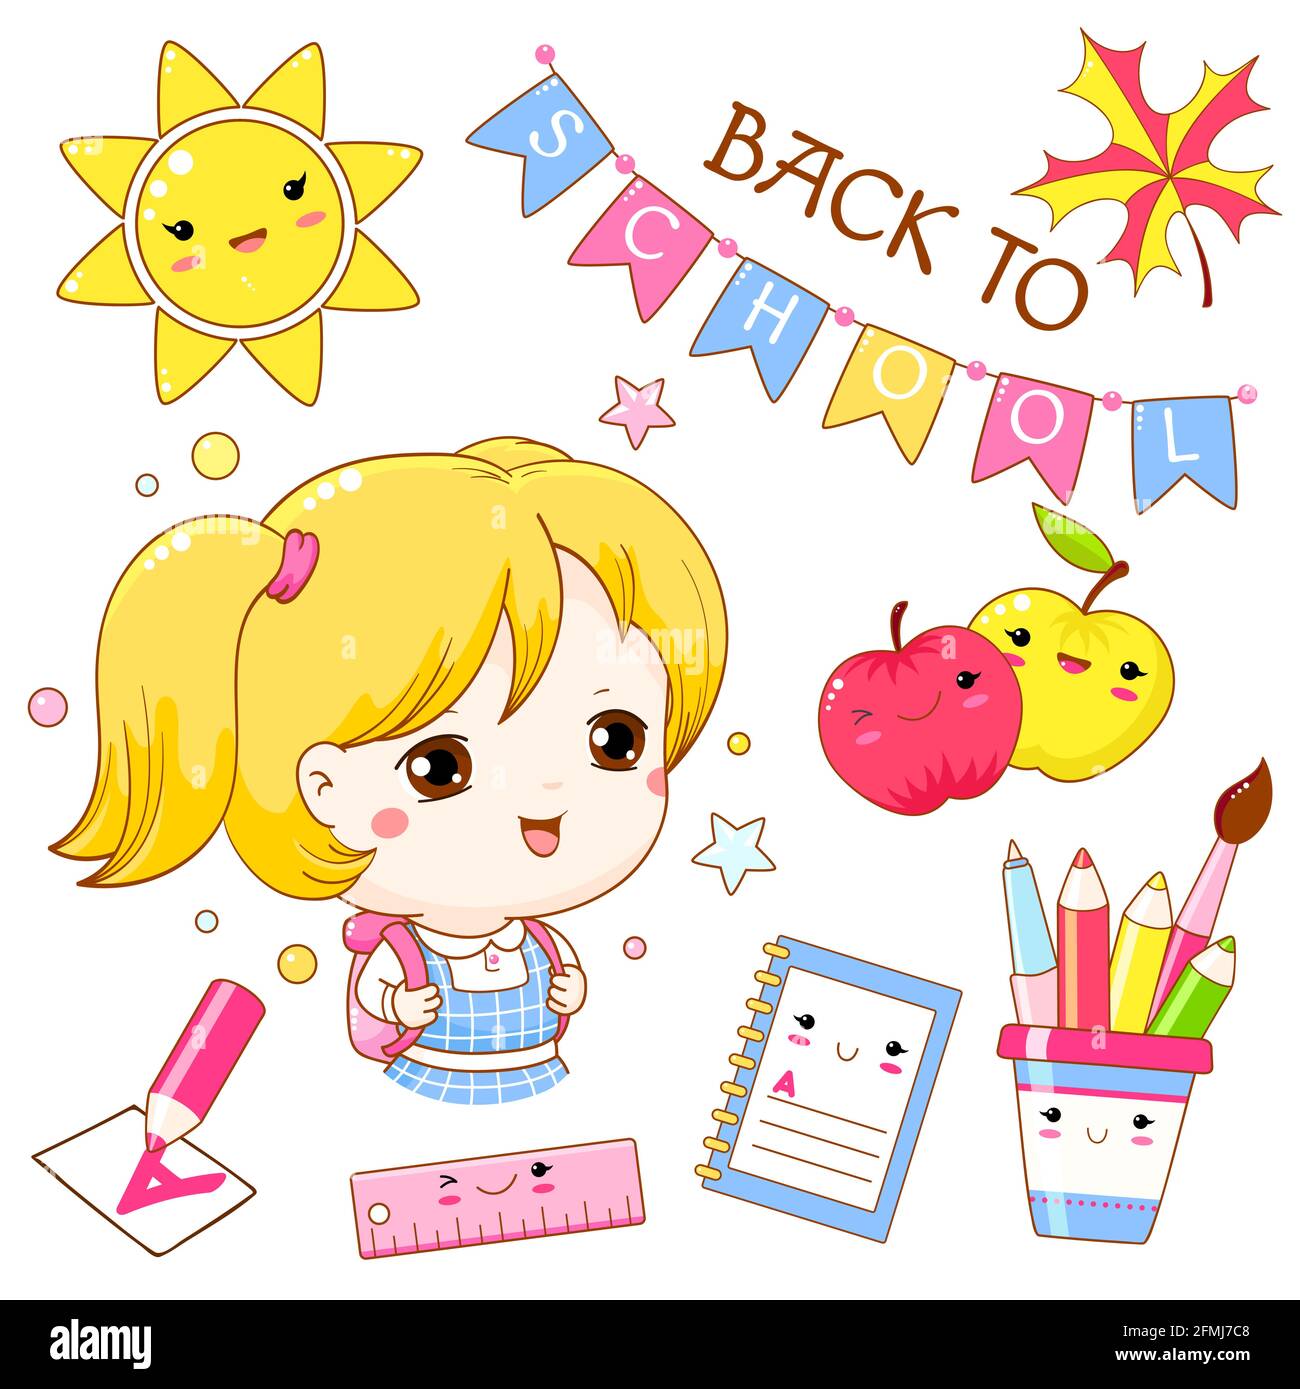 Back to school. Little girl with a backpack. Collection in kawaii style - schoolgirl, apple, notebook, pencil. Vector illustration EPS8 Stock Vector